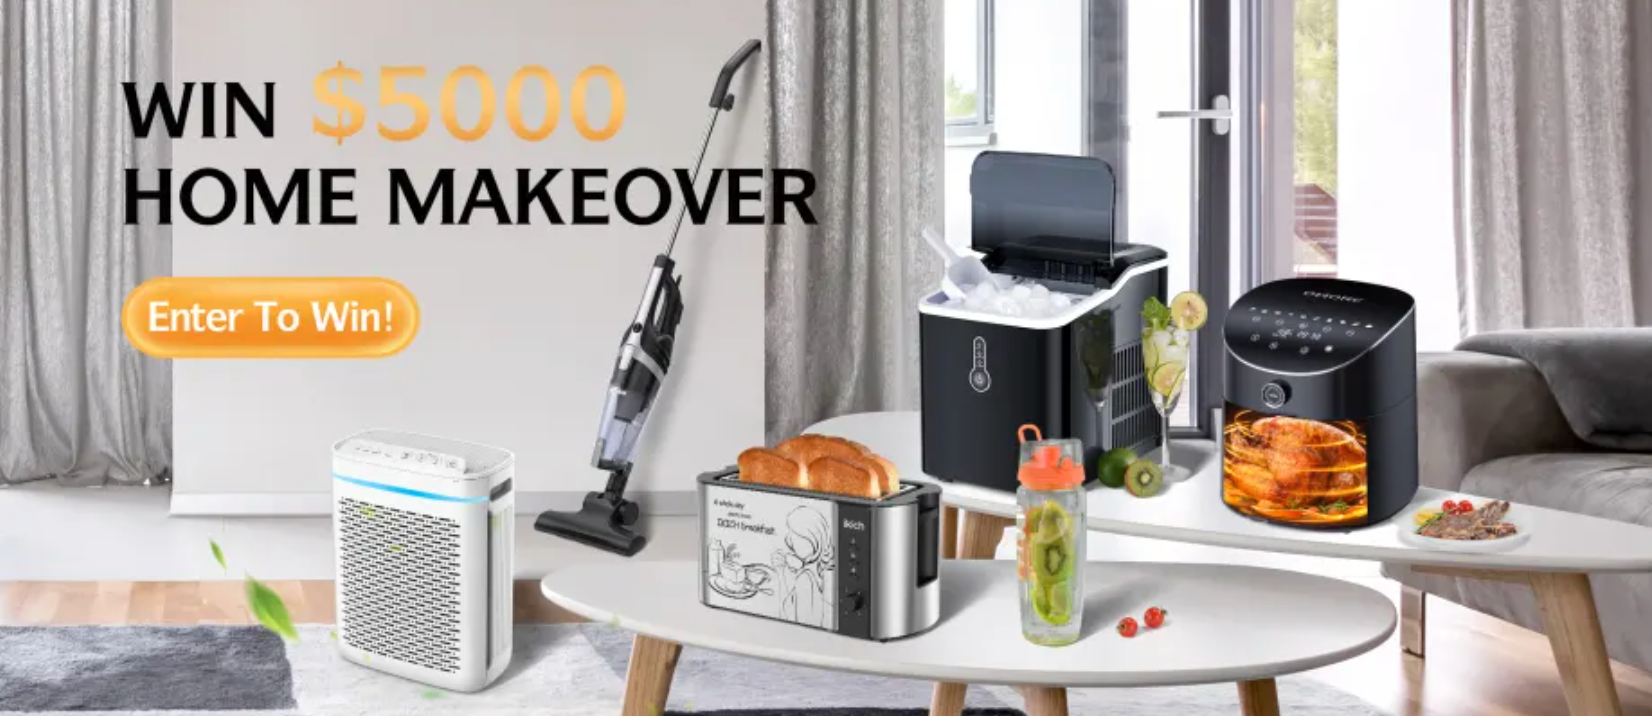 Win 5000 Free Home Makeover from Homasy Contest Canada